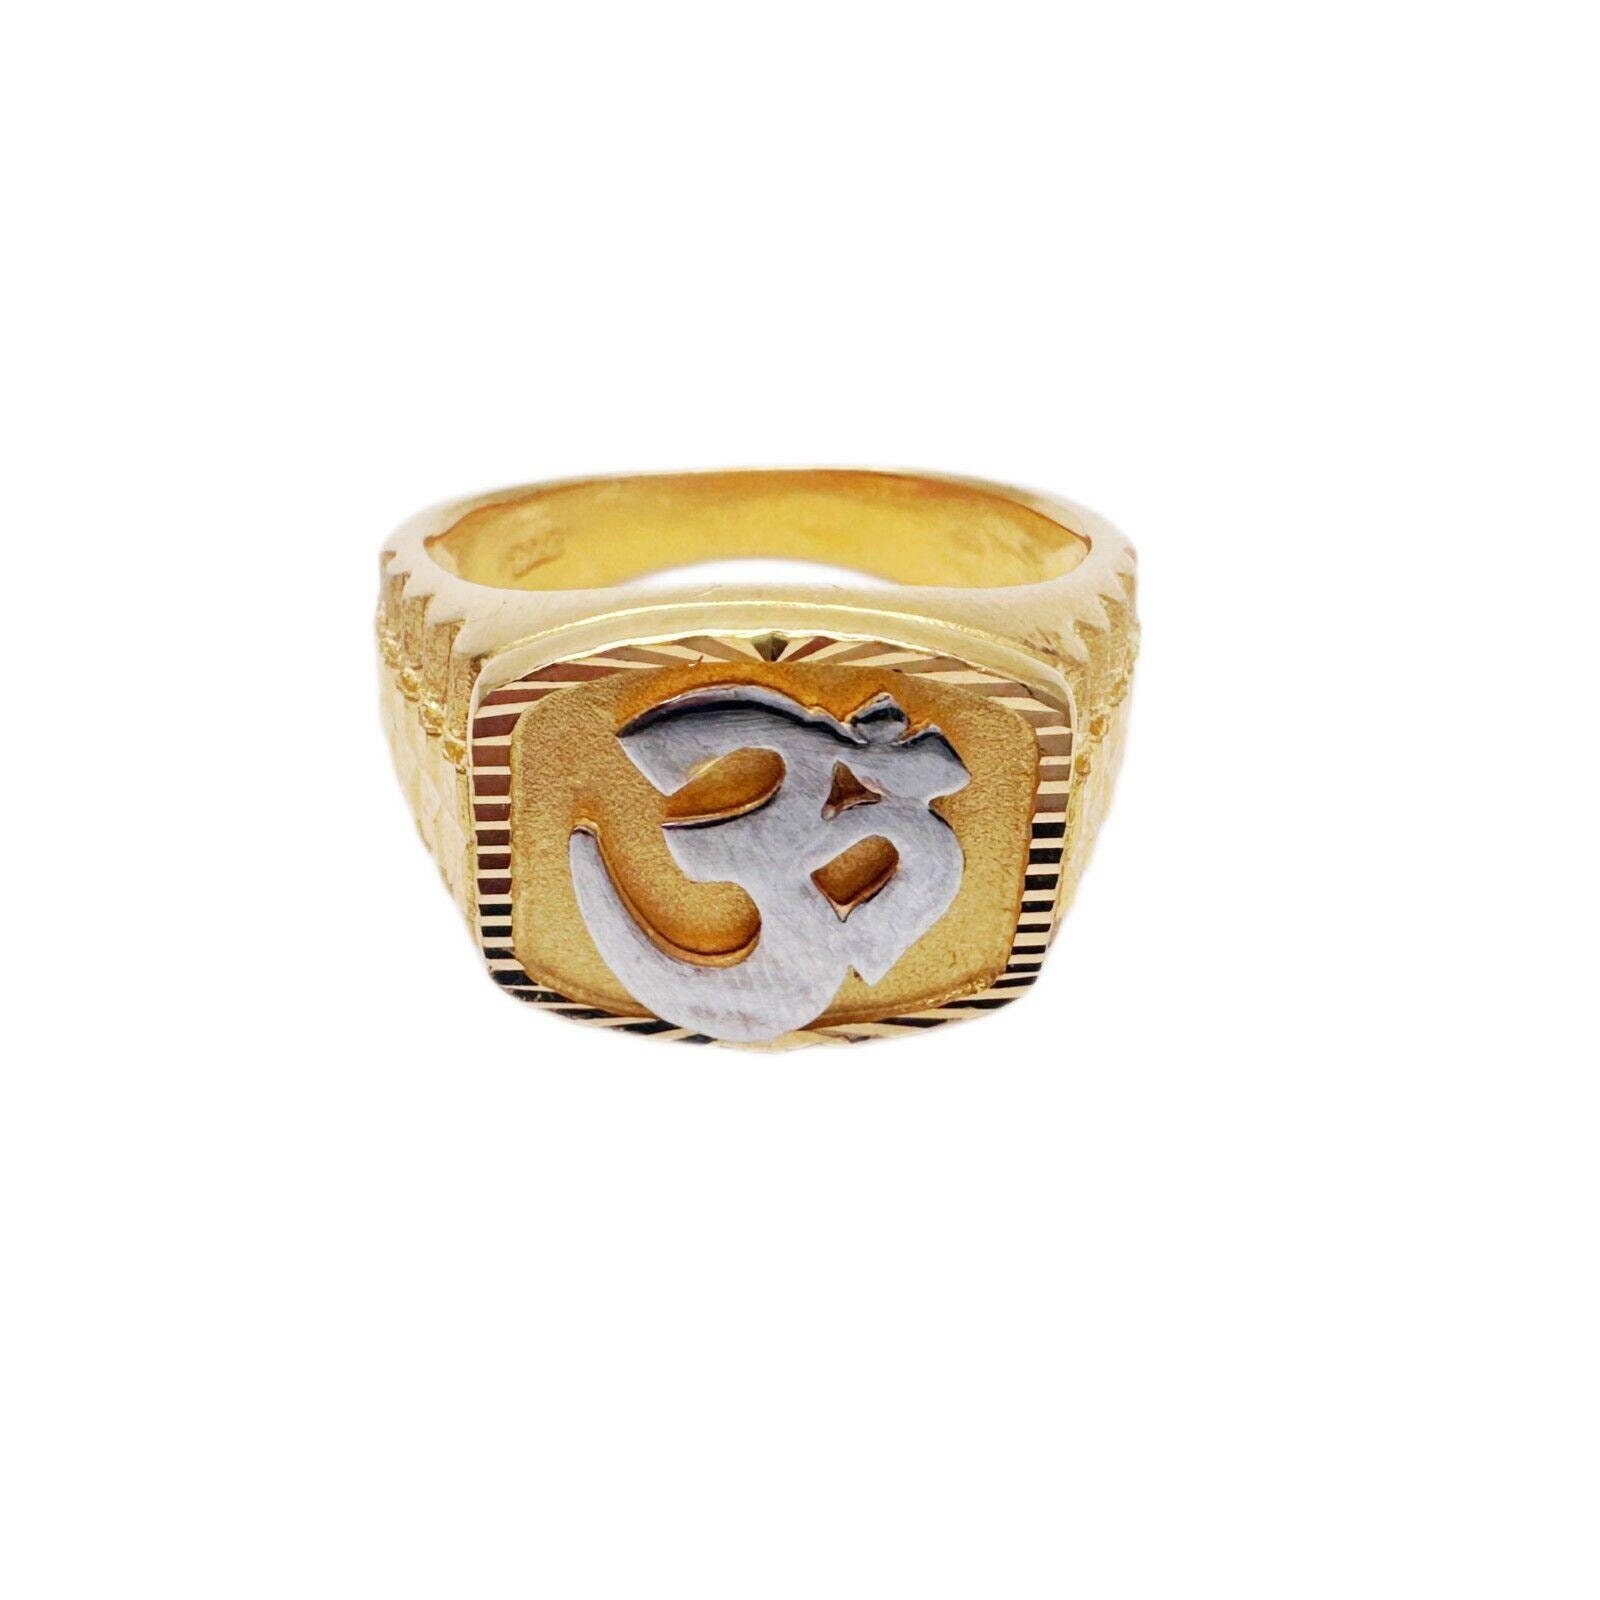 Buy quality Gold om diamond ring in Ahmedabad